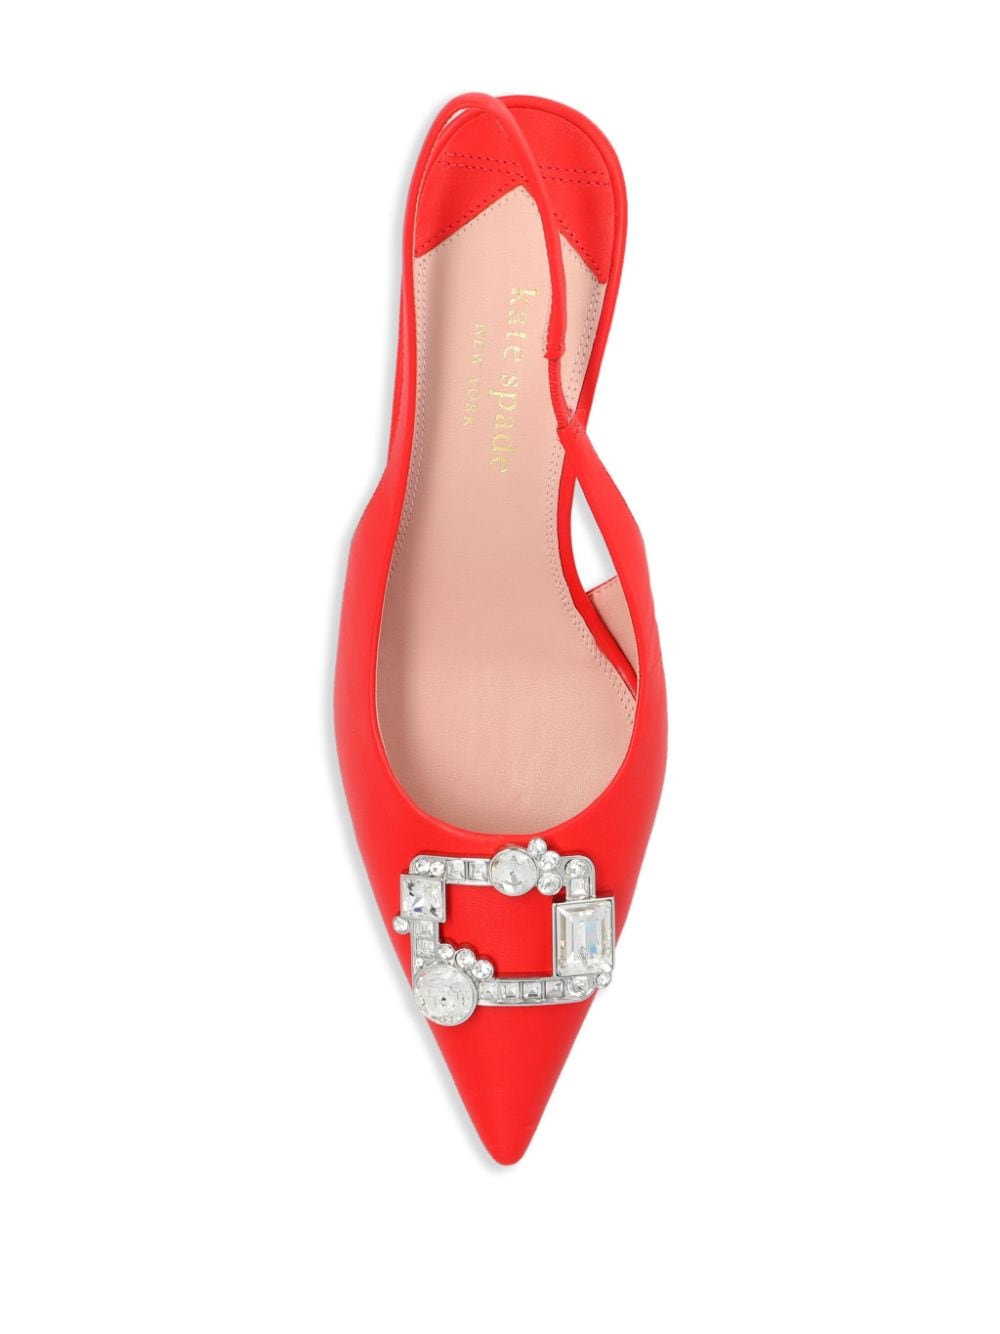 Shop Kate Spade Renata 65mm Leather Slingback Pumps In Red